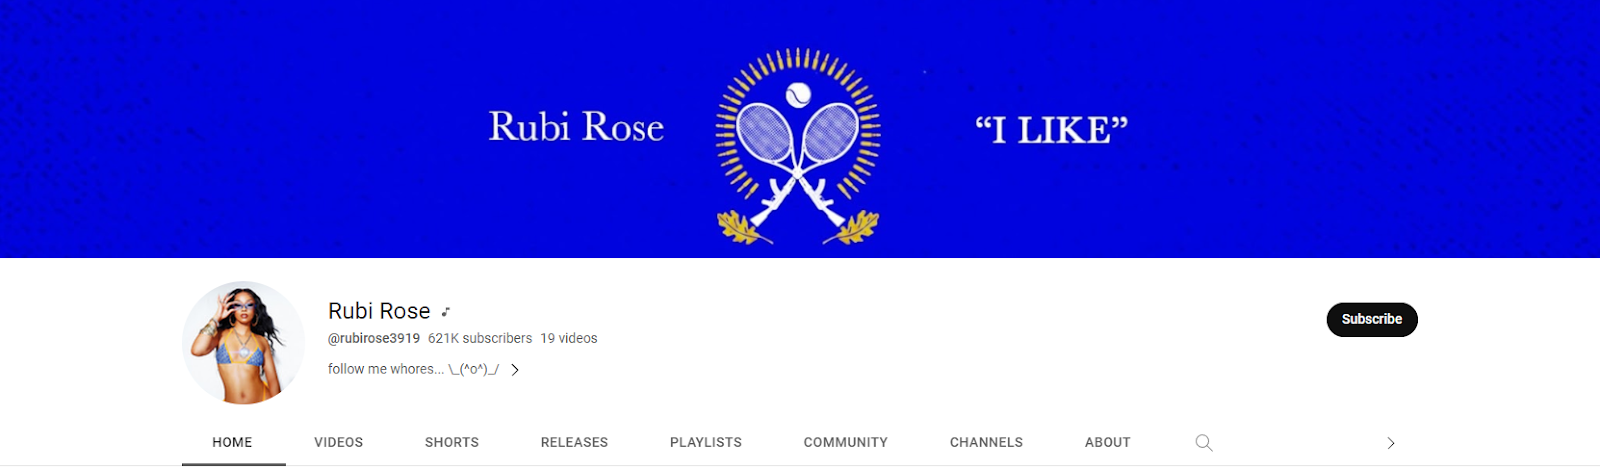 Rose YouTube page